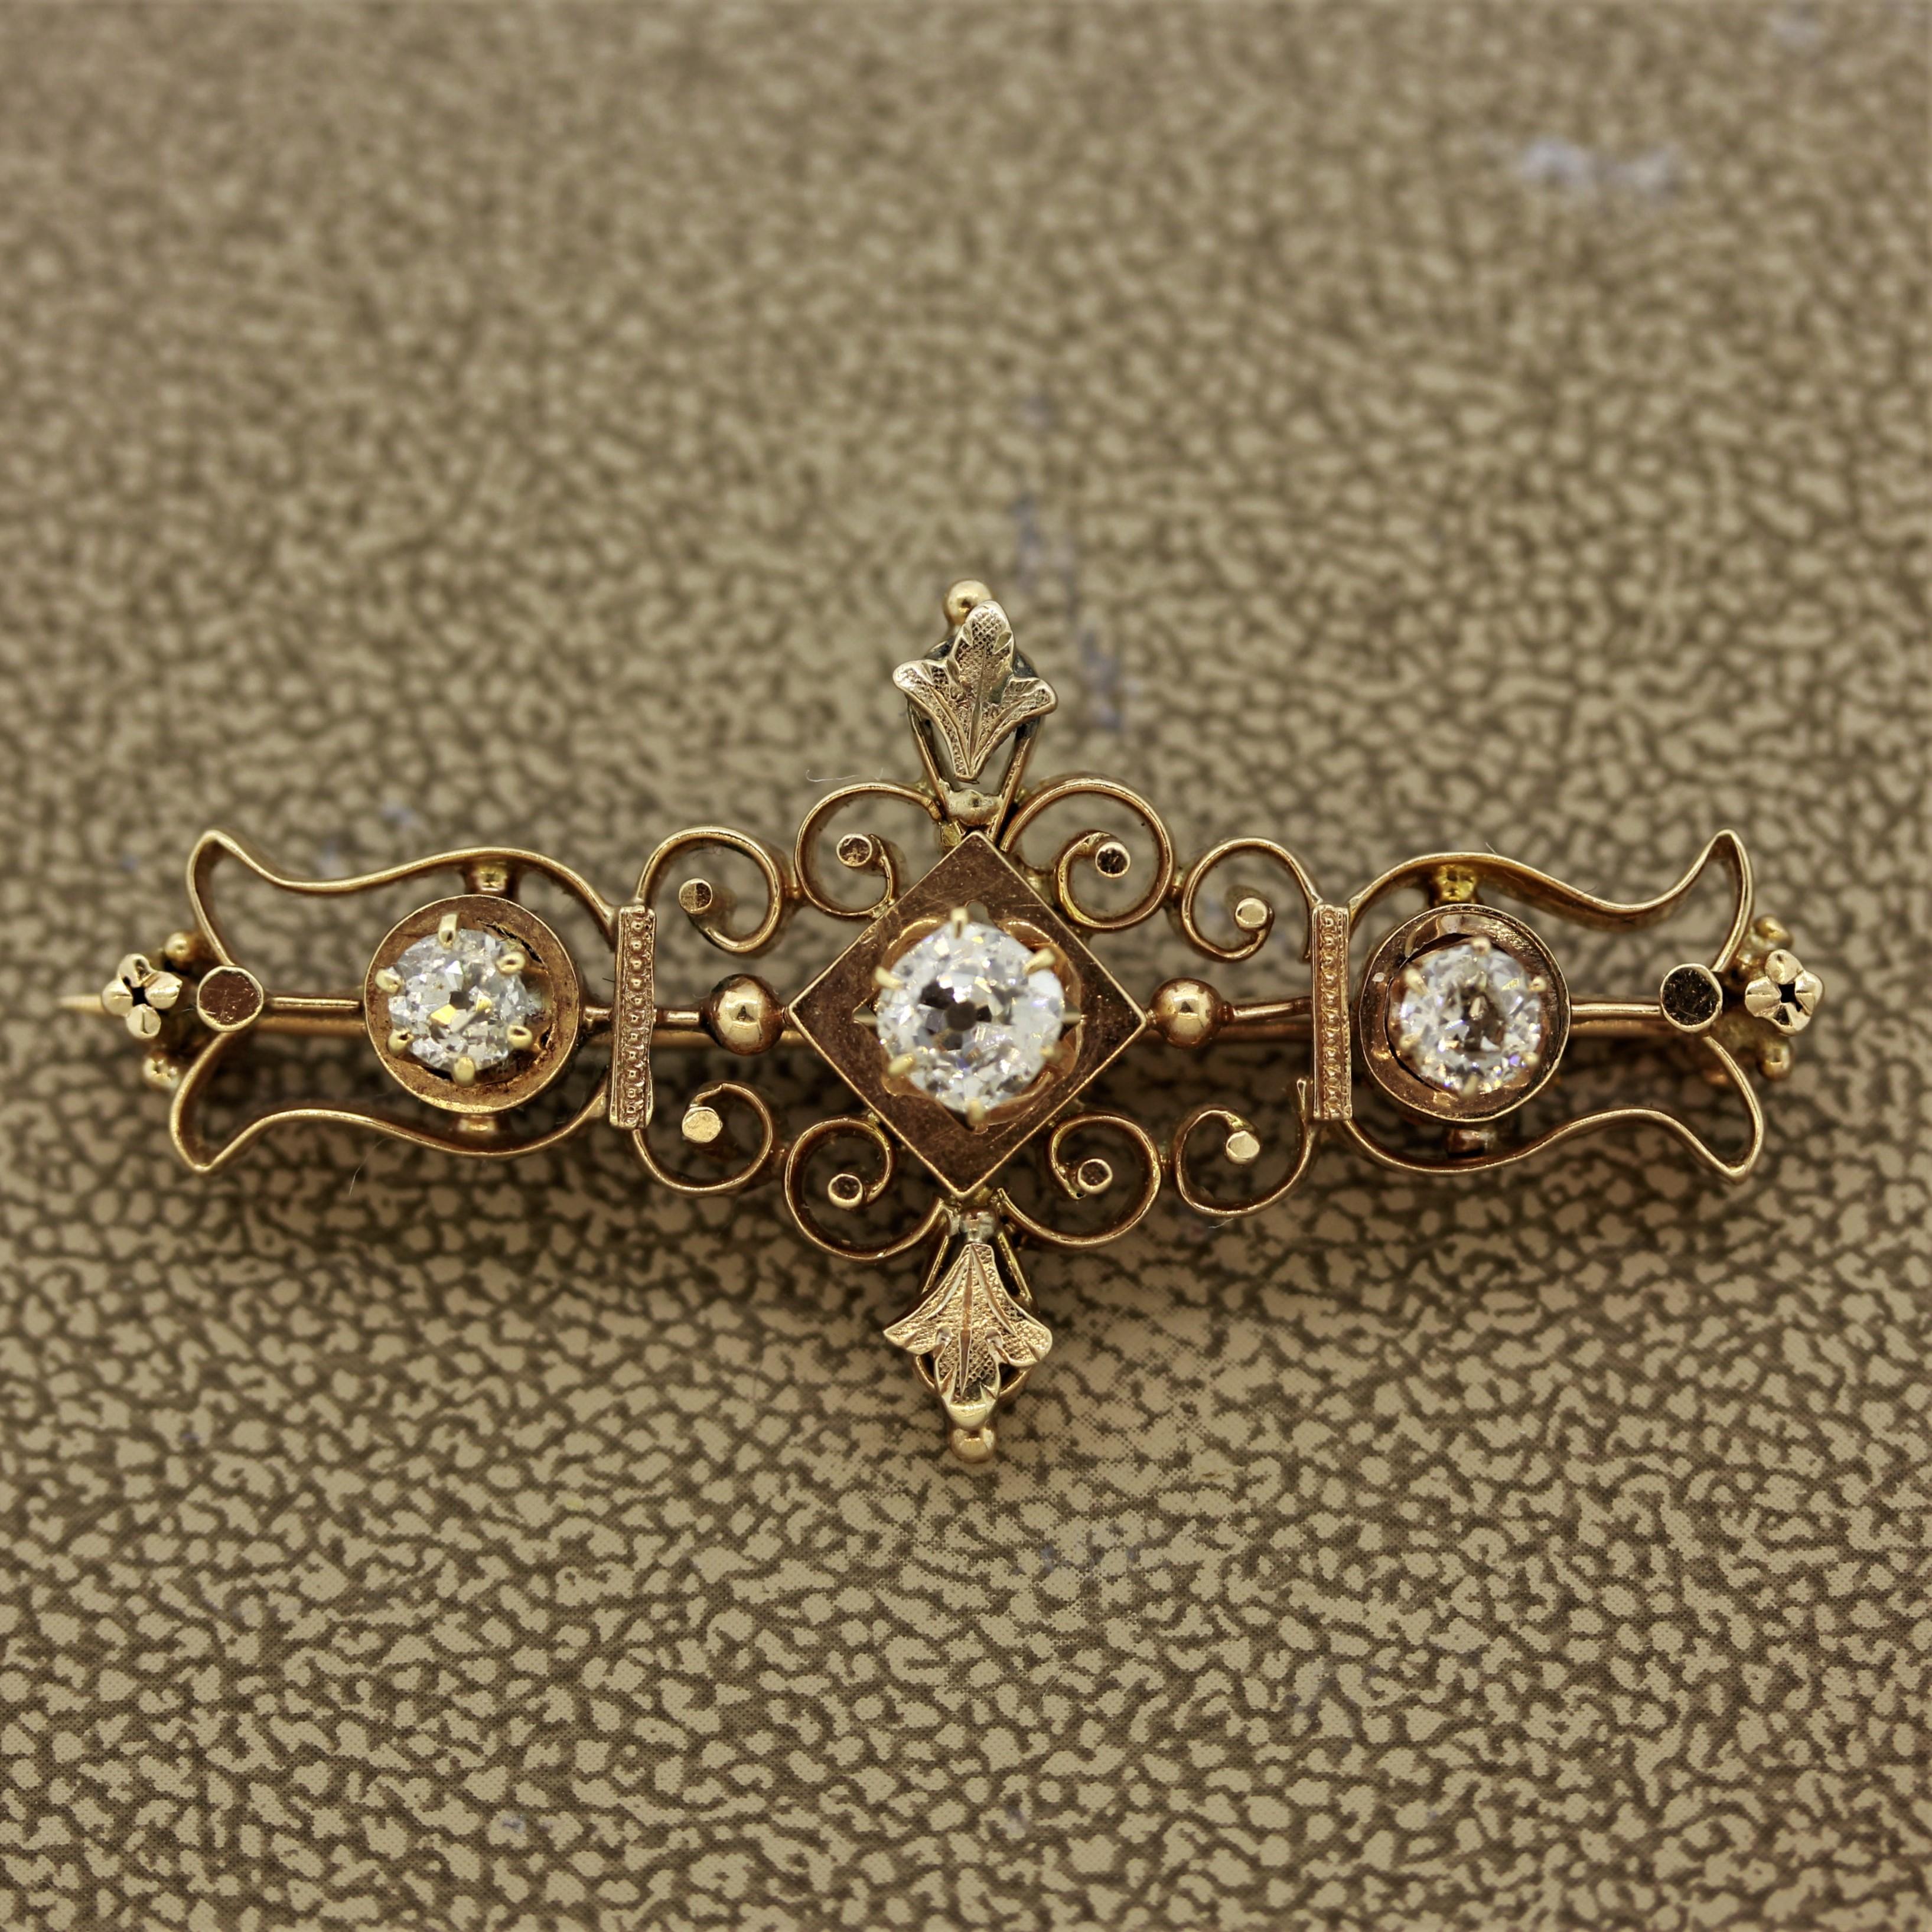 A stylish antique from the end of the 19th century, this Victorian pin features 3 round old cut diamonds weighing a total of 0.75 carats. The piece has natural characteristics and filigree around the boarder in typical 1890’s jewelry fashion. Made